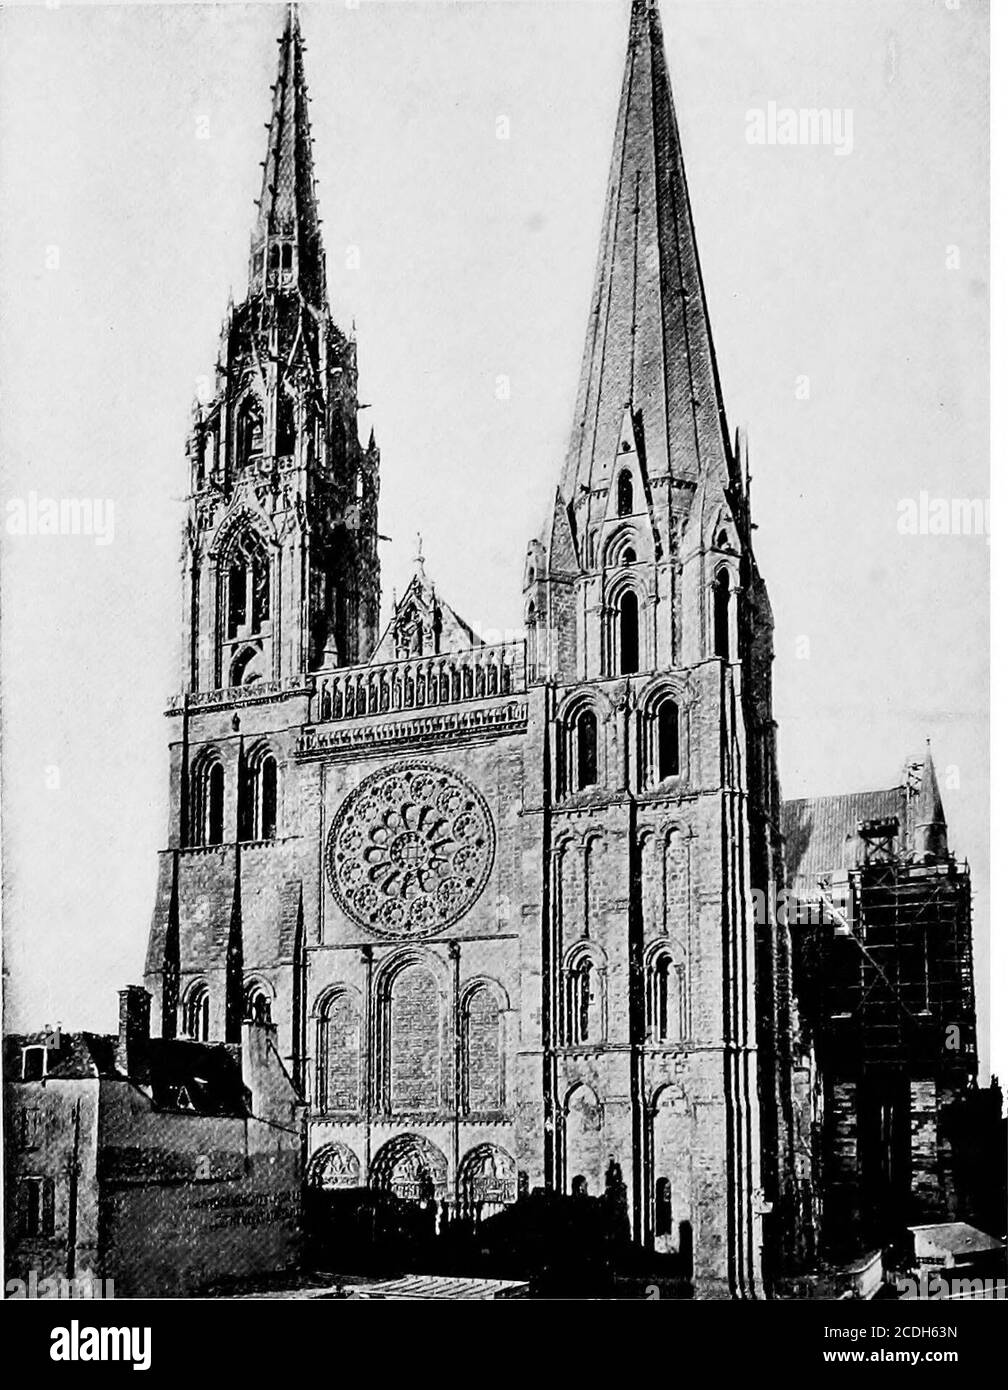 . A short history of art . THE CATHEDRAL OF AMIENSSame period as N6tre Dame, last years of twelfth and beginning of thir-teenth centuries. Typical cathedral of France. Having less charmthan one or two others, but having nearly every feature of agreat Gothic church in a perfect state of development.. CHARTRES CATHEDRAL Note the impressive simplicity, with the one central jewel of thewheel window. GOTHIC ARCHITECTURE 185 and lay it directly upon the vaulting. Another great ad-vantage of pointed arches over round arches was the facilitywith which unequal distances could be spanned by arches ofthe Stock Photo